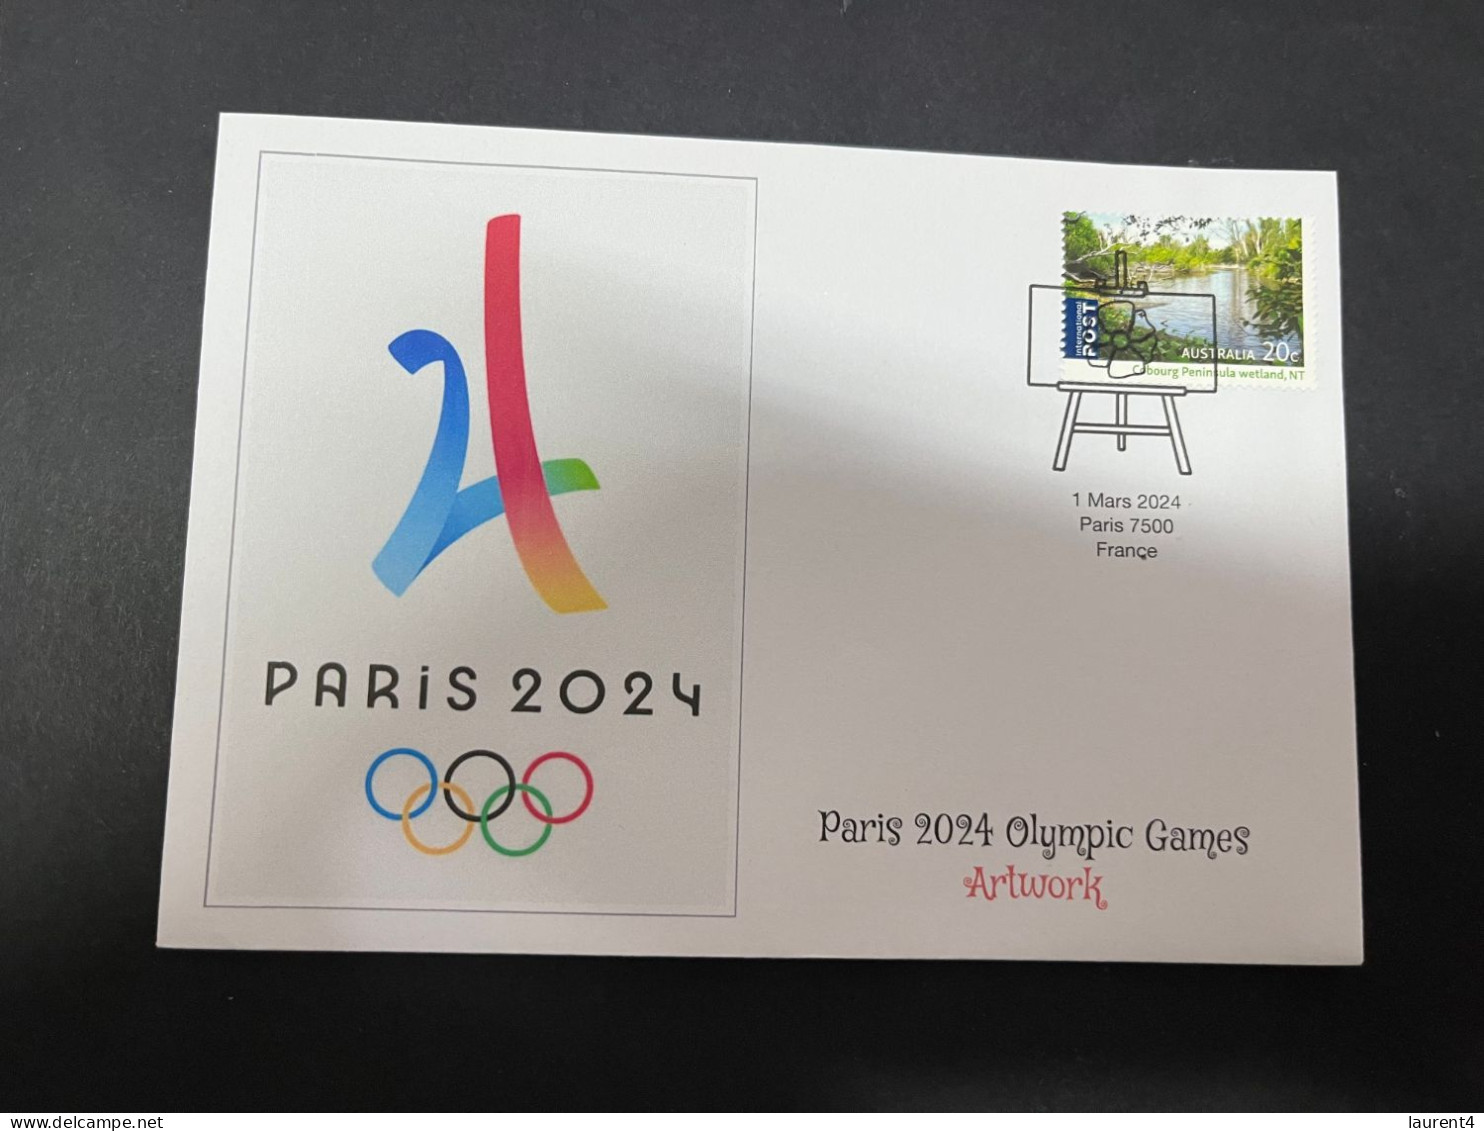 10-3-2024 (2 Y 37) Paris Olympic Games 2024 - 5 (of 12 Covers Series) For The Paris 2024 Olympic Games Artwork - Sommer 2024: Paris